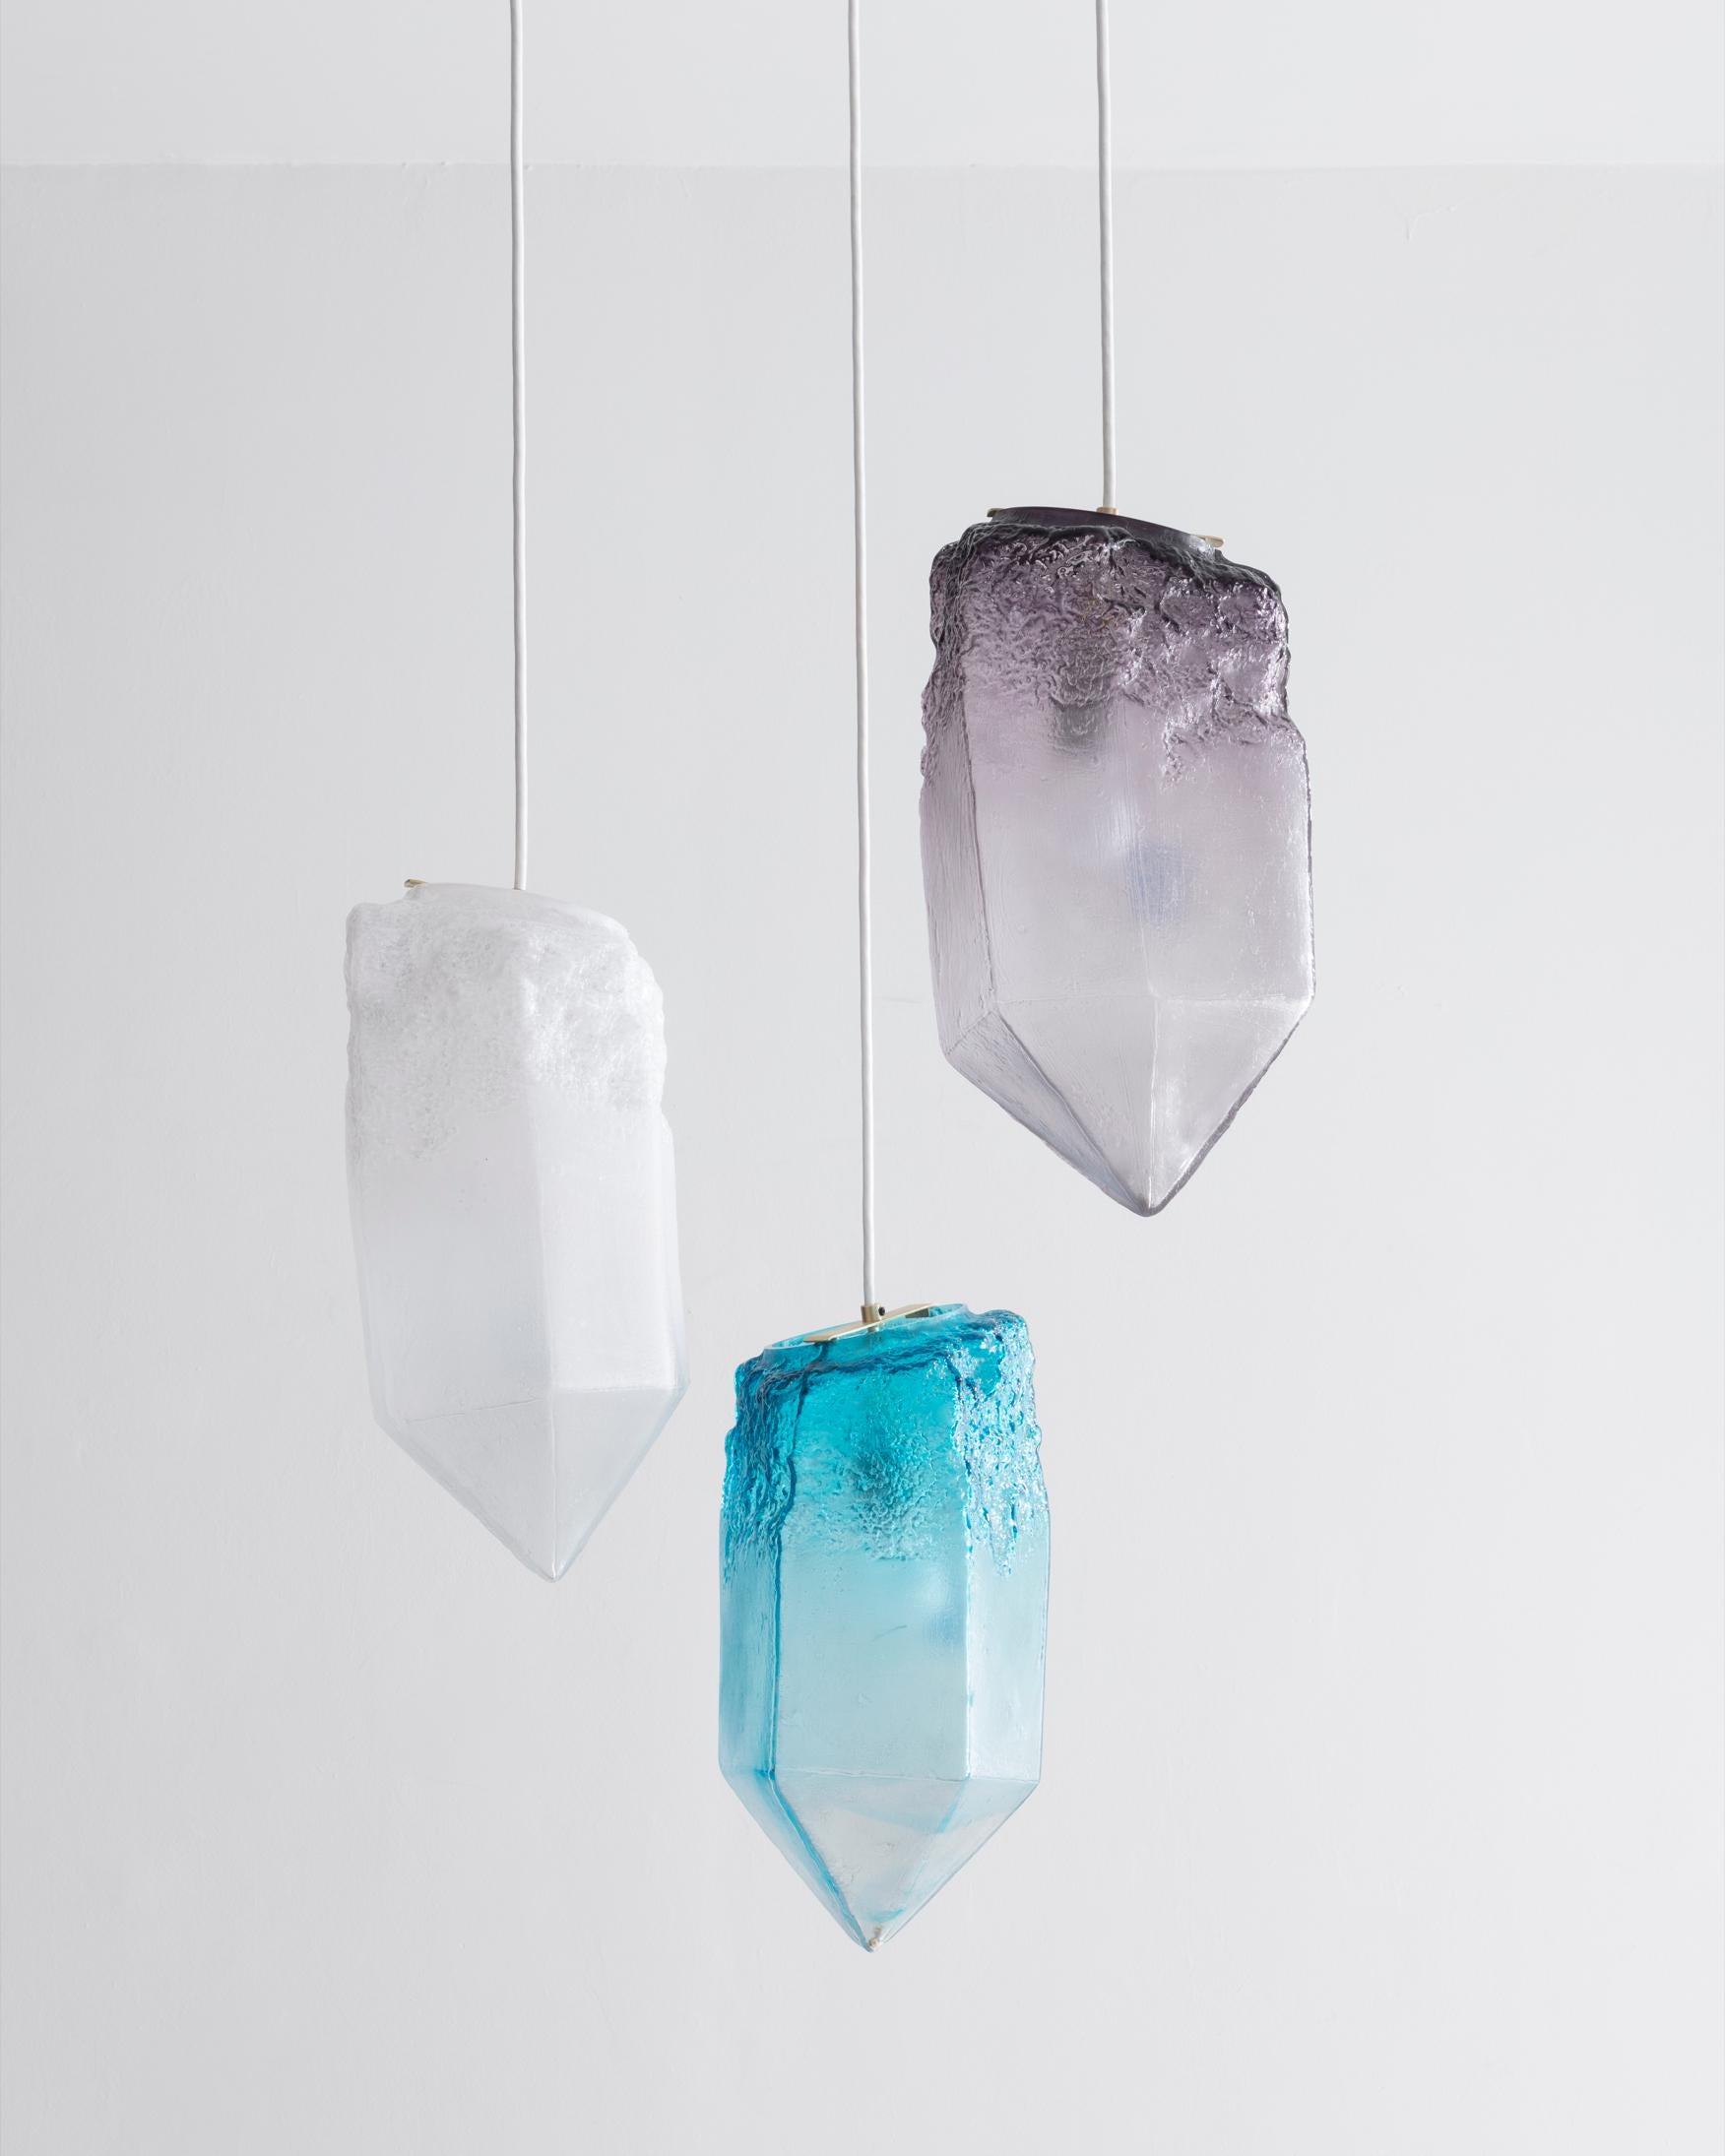 Modern Crystal Pendant Light in Hand Blown Turquoise Glass by Jeff Zimmerman, 2016